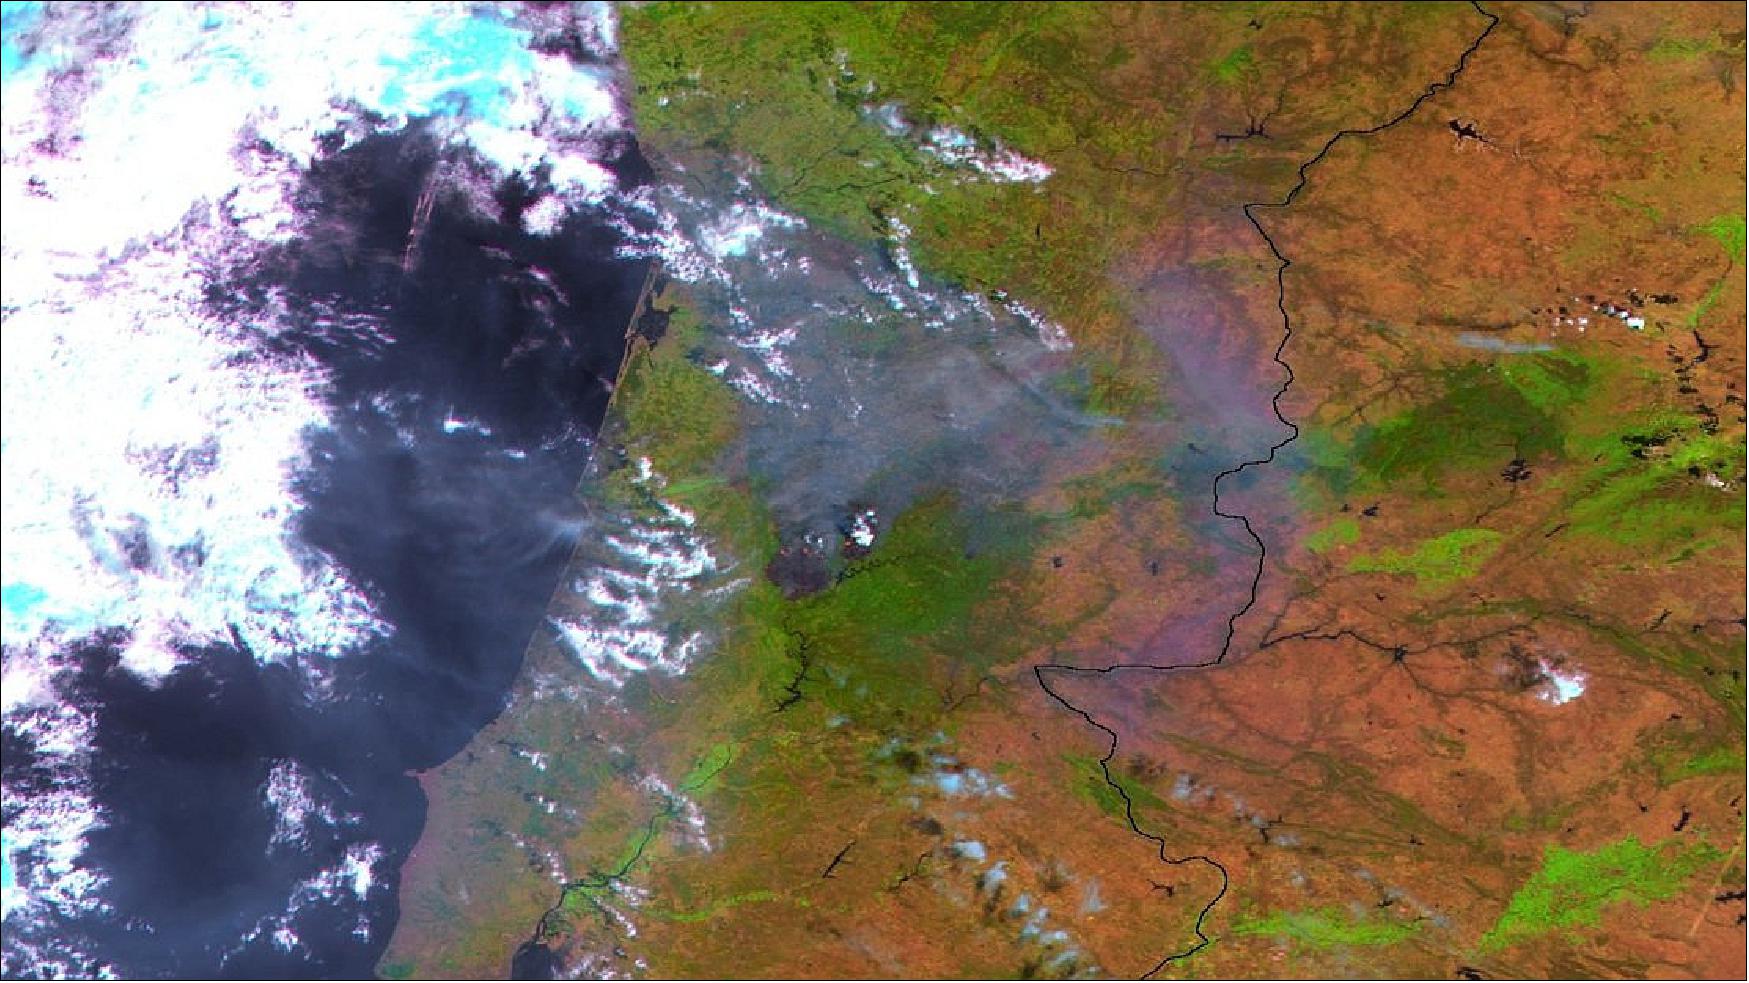 Figure 40: Regional view of fire: A forest fire in Portugal's Pedrógão Grande region, showing burnt scars, smoke plumes and hotspots (seen in red). This 330 m-resolution image was acquired on 18 June 2017 by ESA's PROBA-V satellite (image credit: ESA/BELSPO produced by VITO)